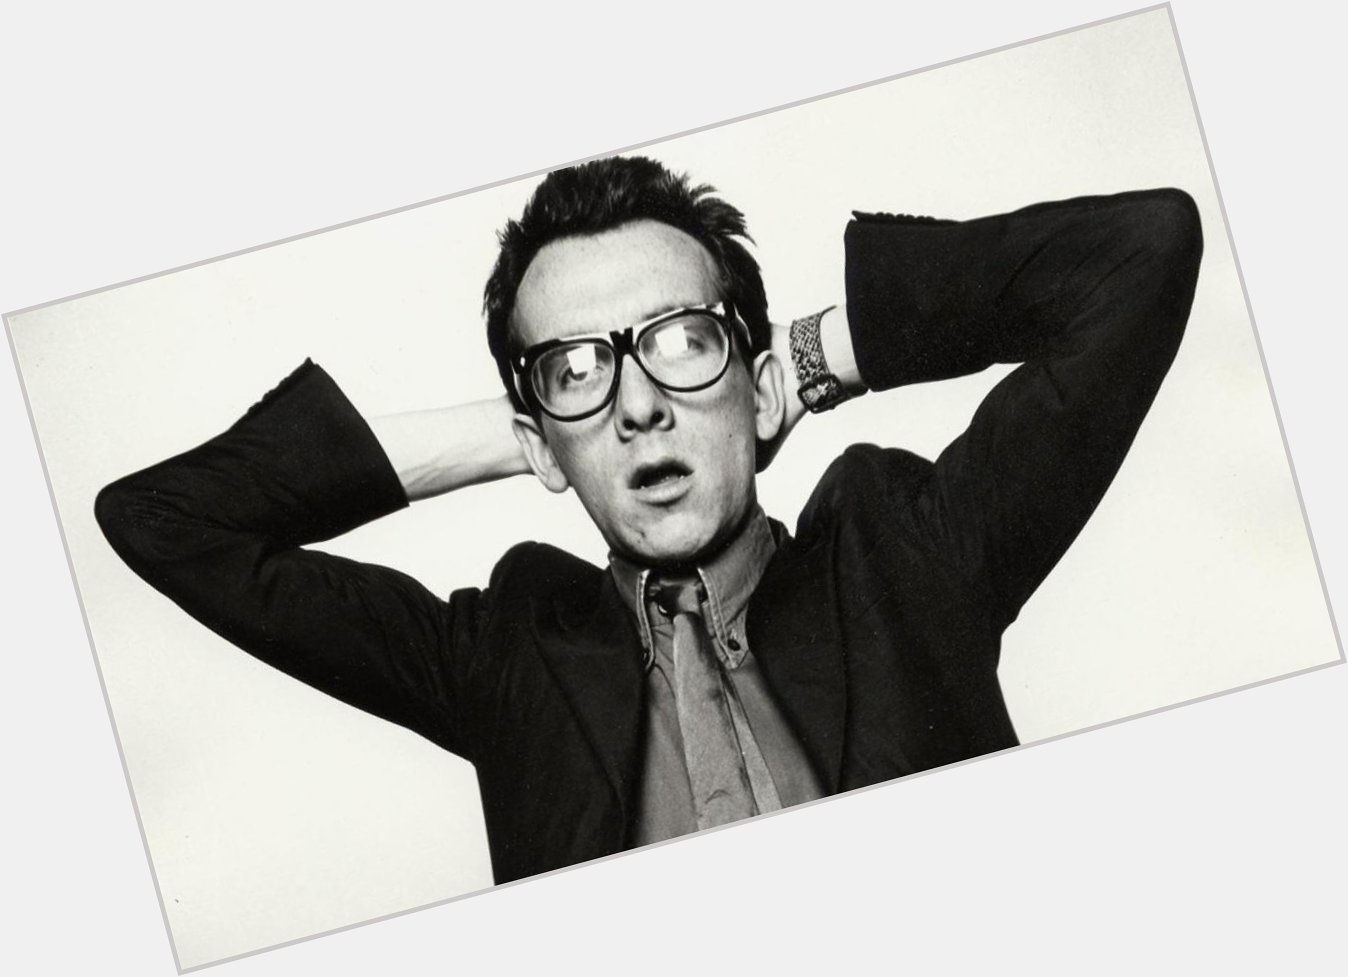 Happy 61st Birthday to Elvis Costello. So many amazing songs to choose from. What are your favorites? 